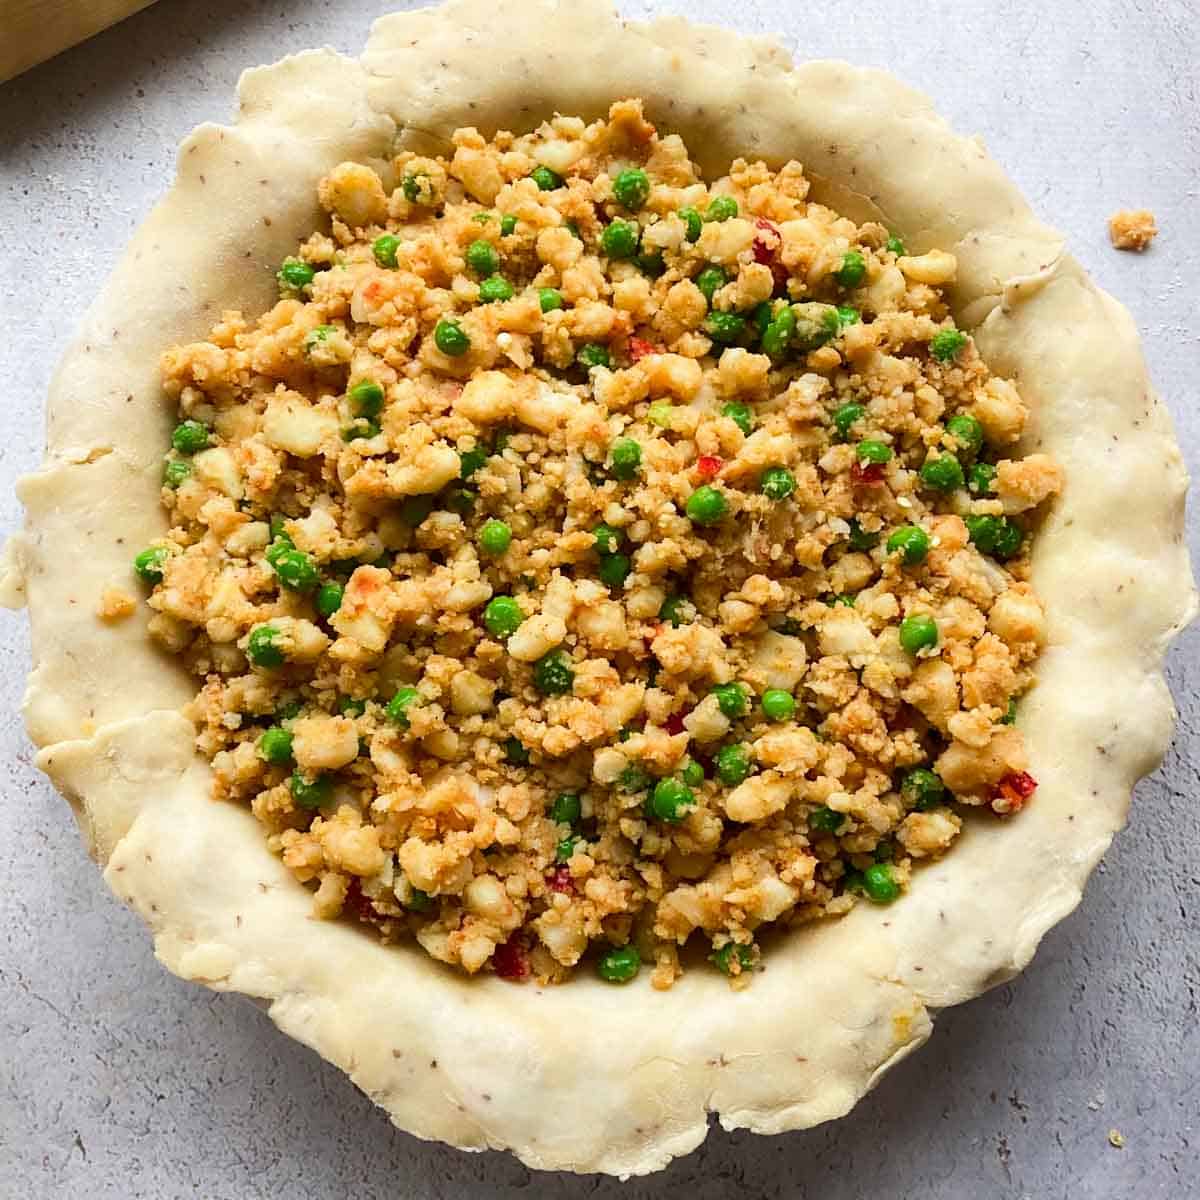 Inside of samosa pot pie before being baked